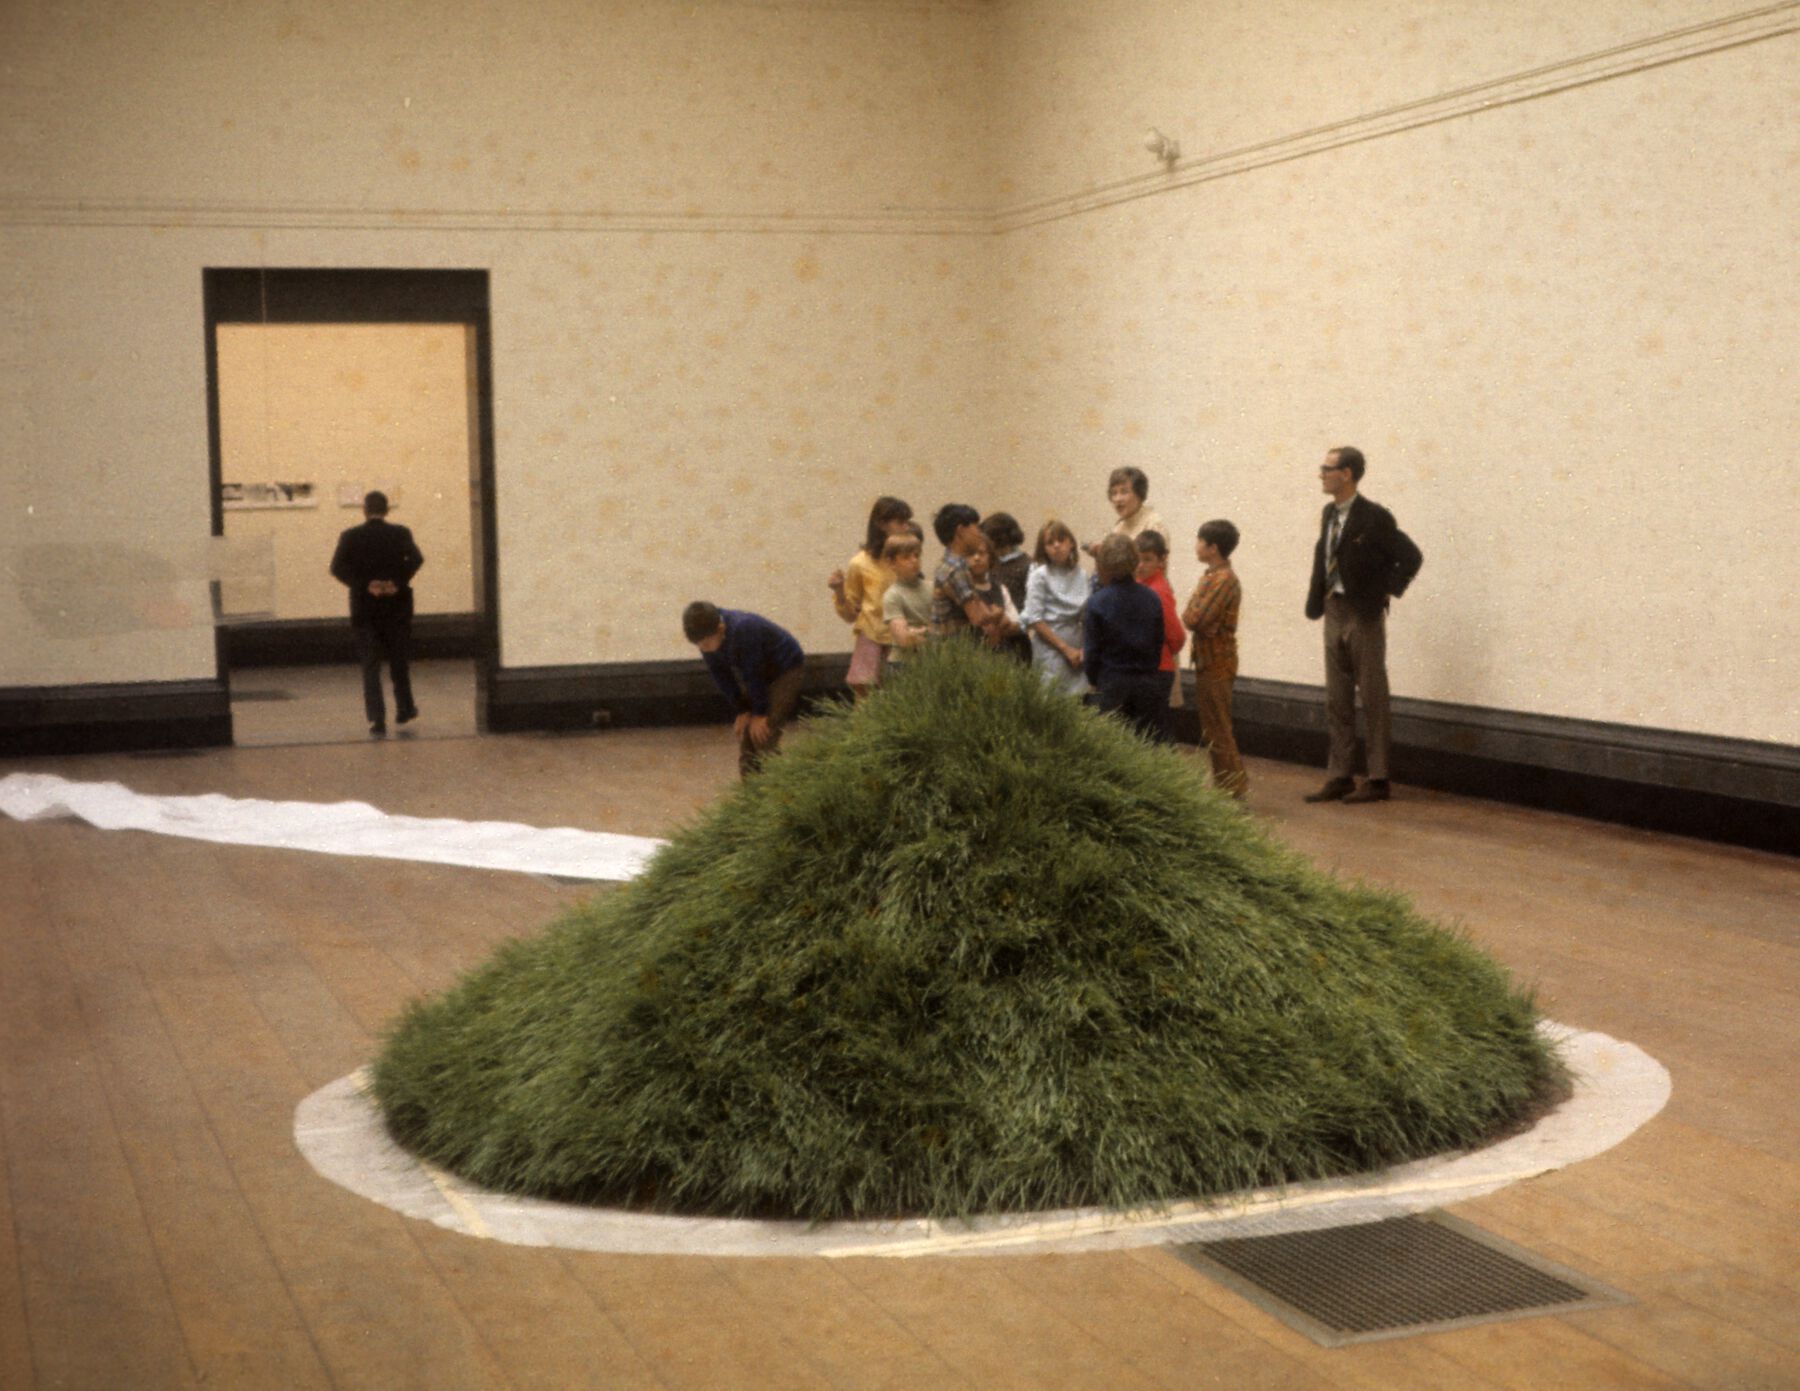 A grass mound displayed in a middle of a gallery while figures in the back inspect it from a distance